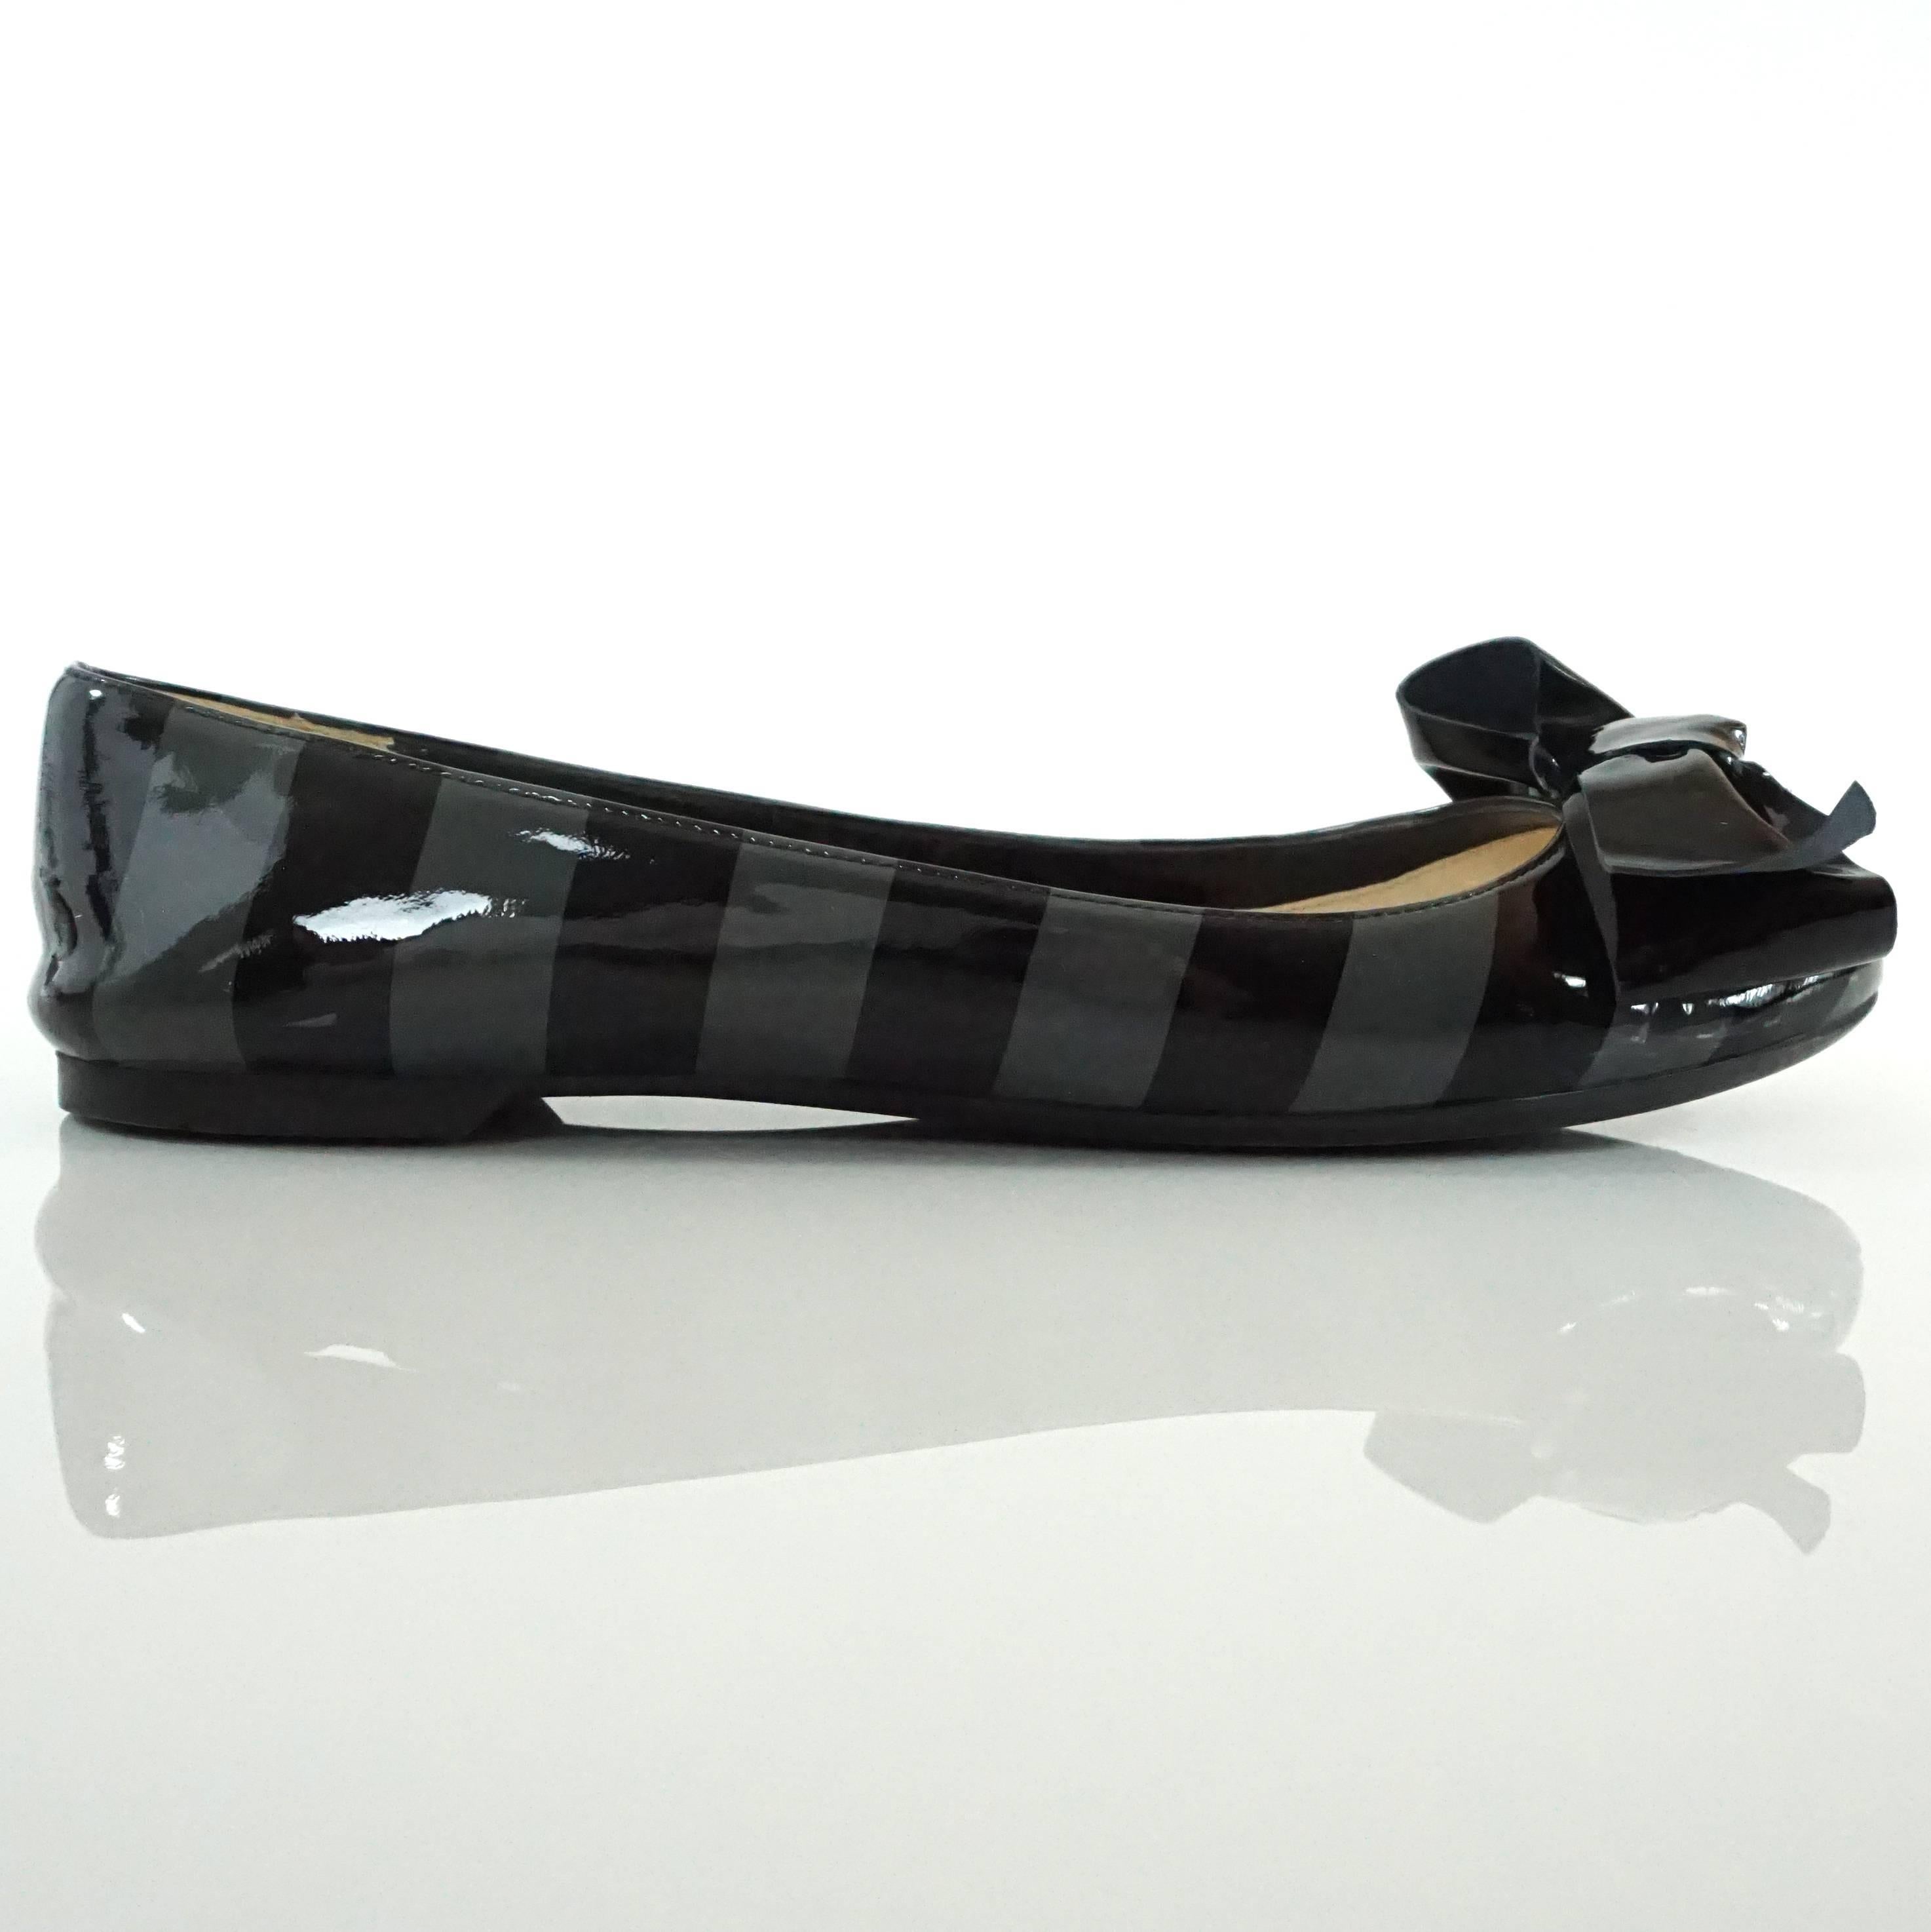 These Prada patent flats have black and gray stripes and a black bow. They come with a duster. These shows are in very good condition with minor wear inside and on the bottom.